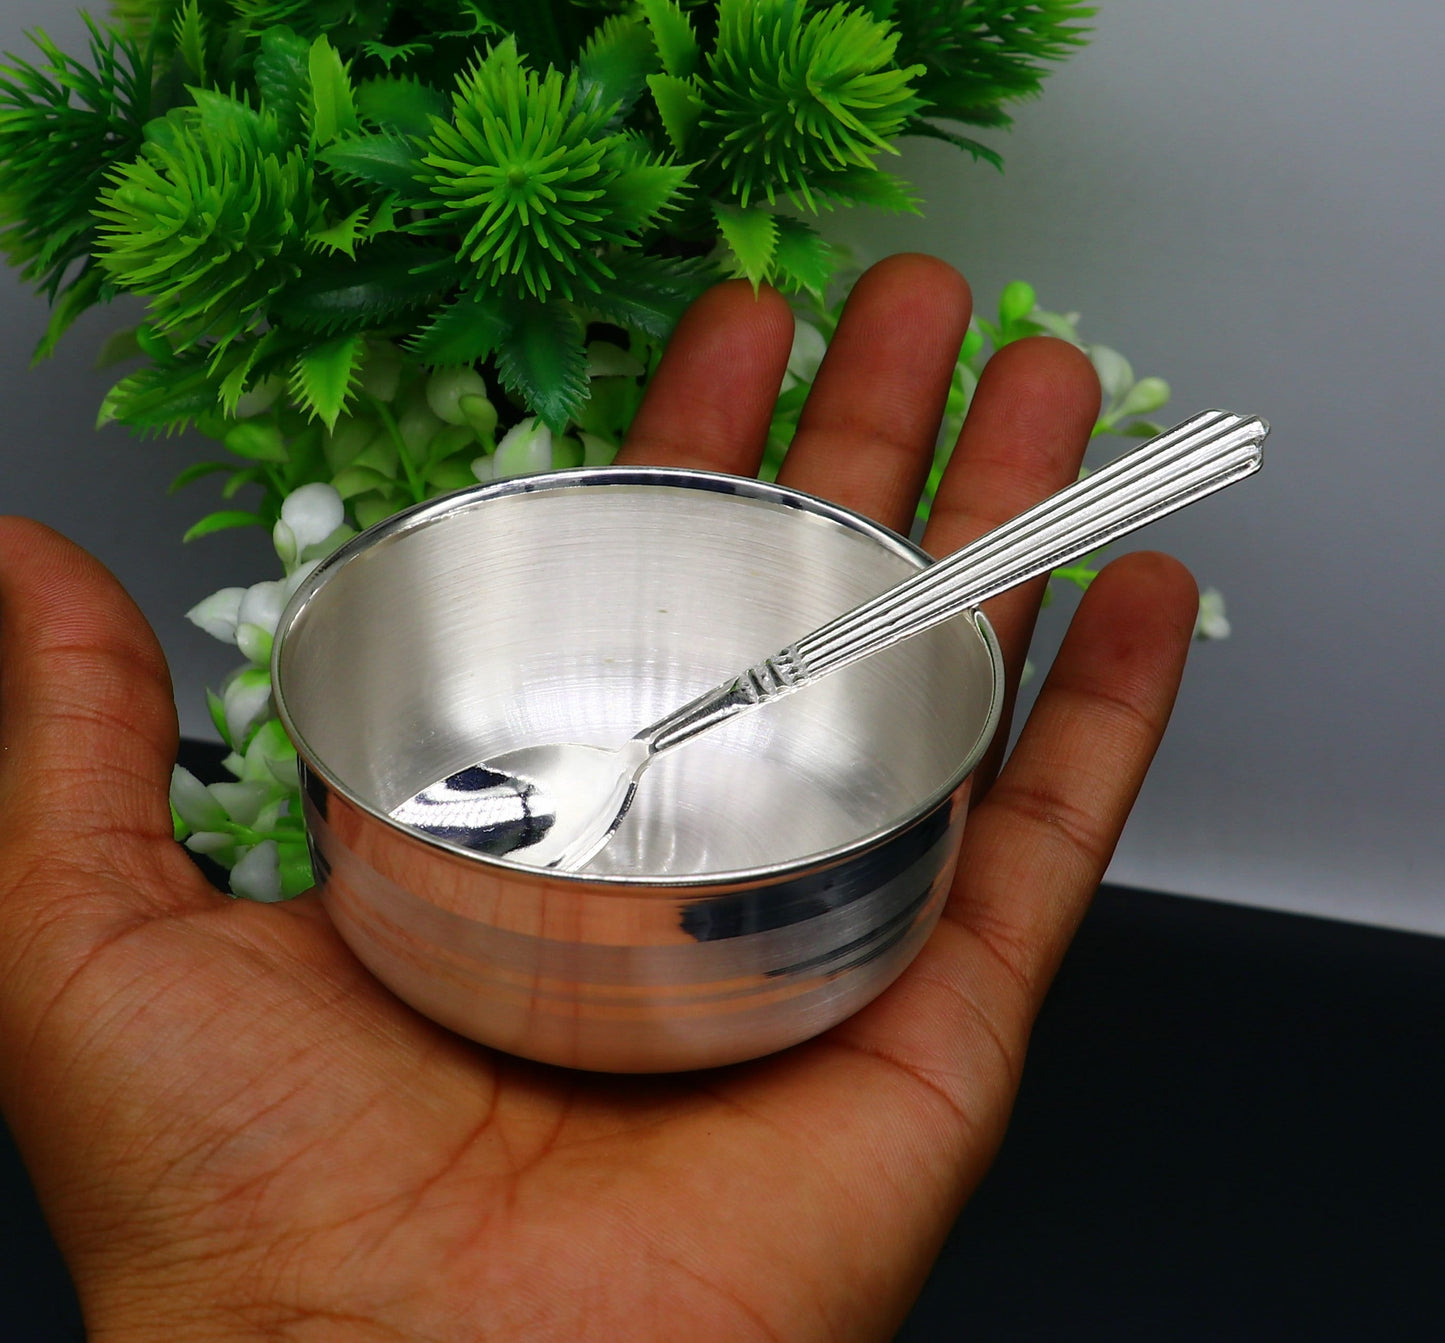 999 pure sterling silver handmade solid silver bowl & spoon, healthy serving bowl, silver vessel, baby serving food utensils baby set sv193 - TRIBAL ORNAMENTS